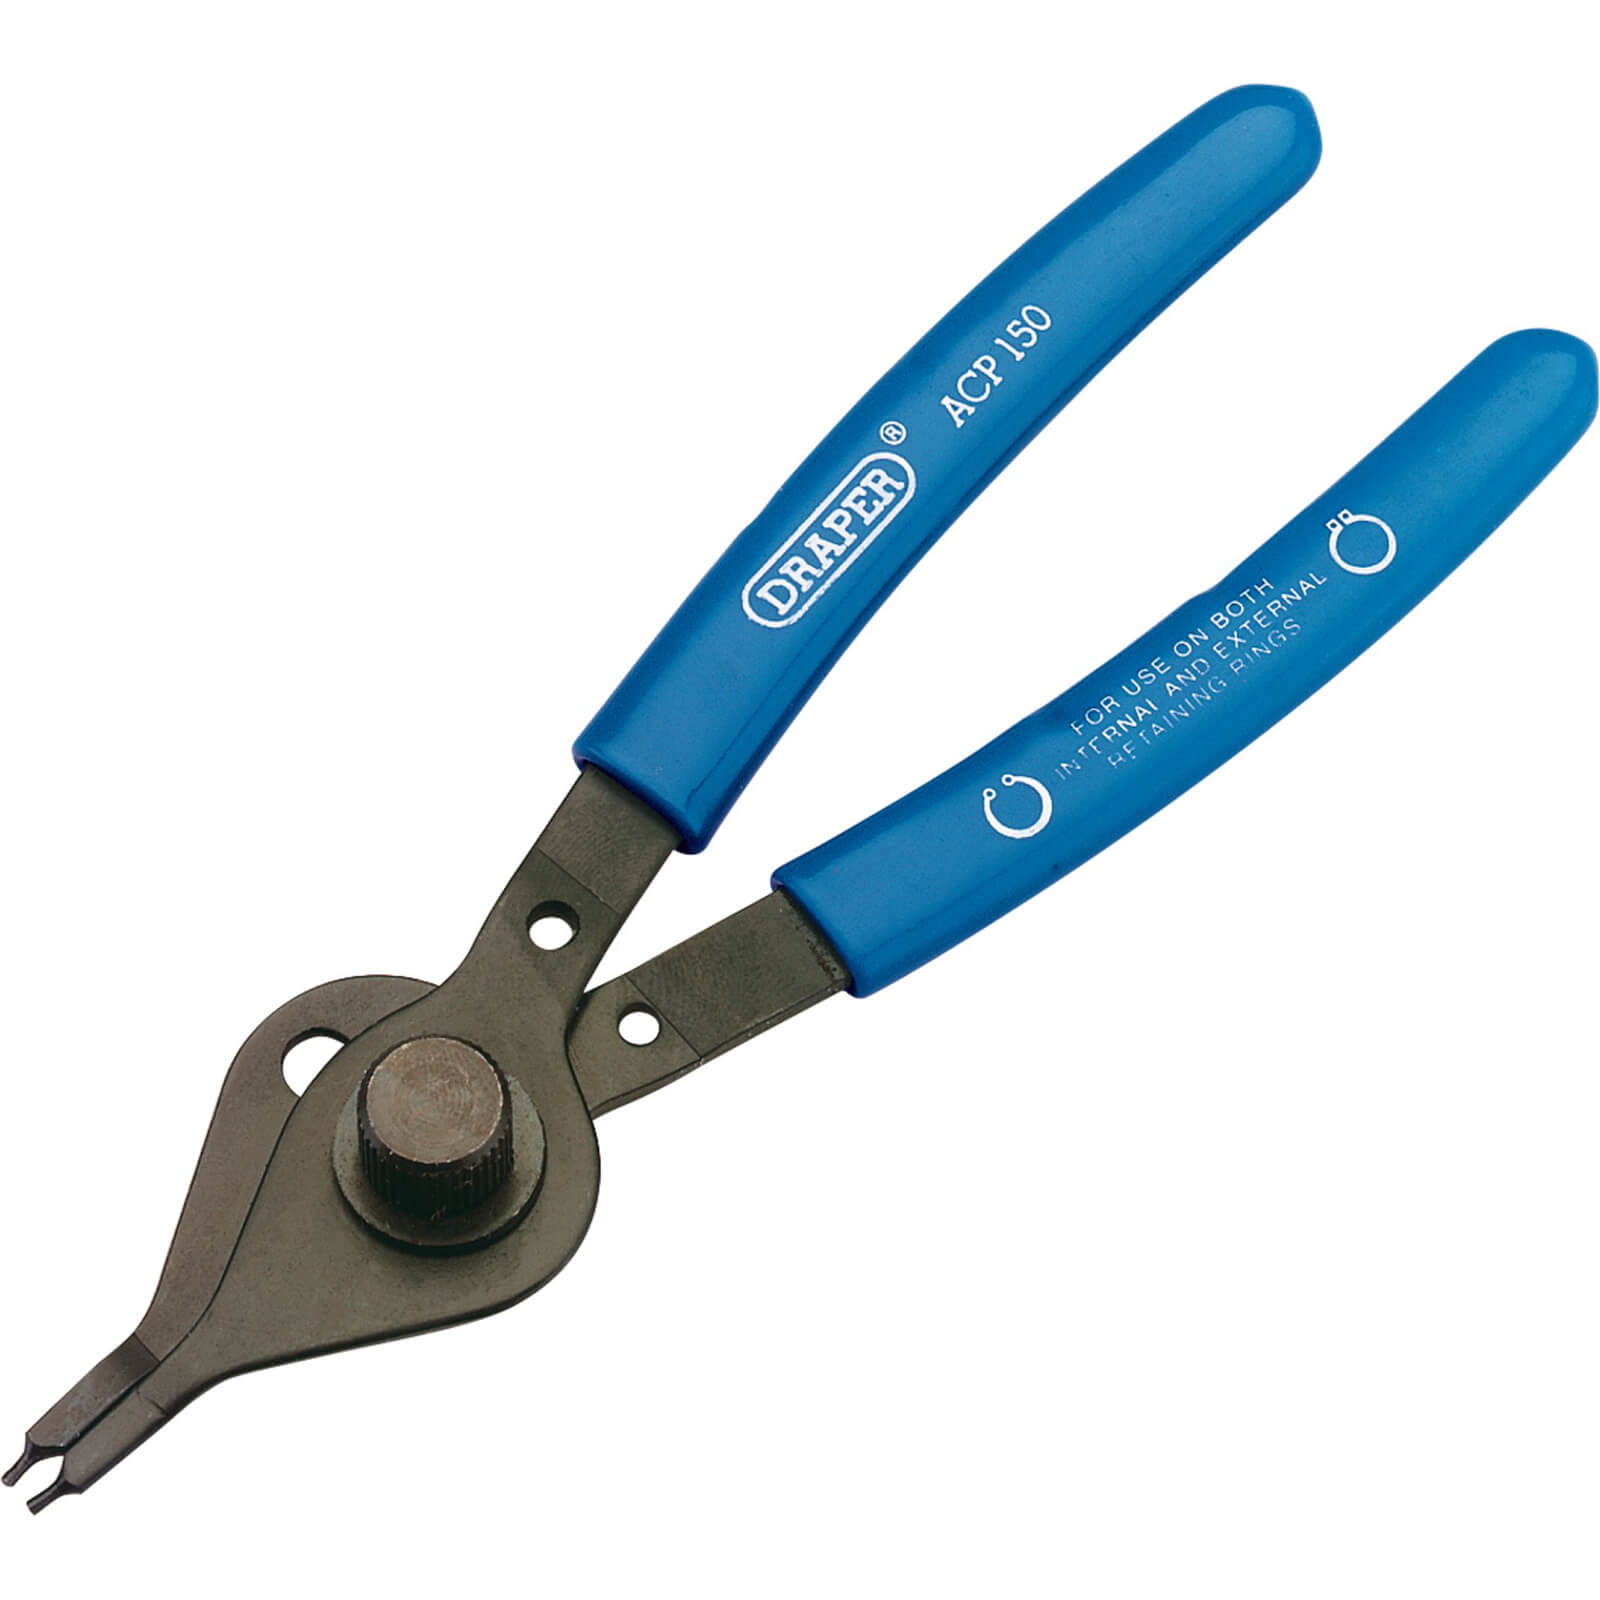 Image of Draper Straight Nose Reversible Circlip Pliers